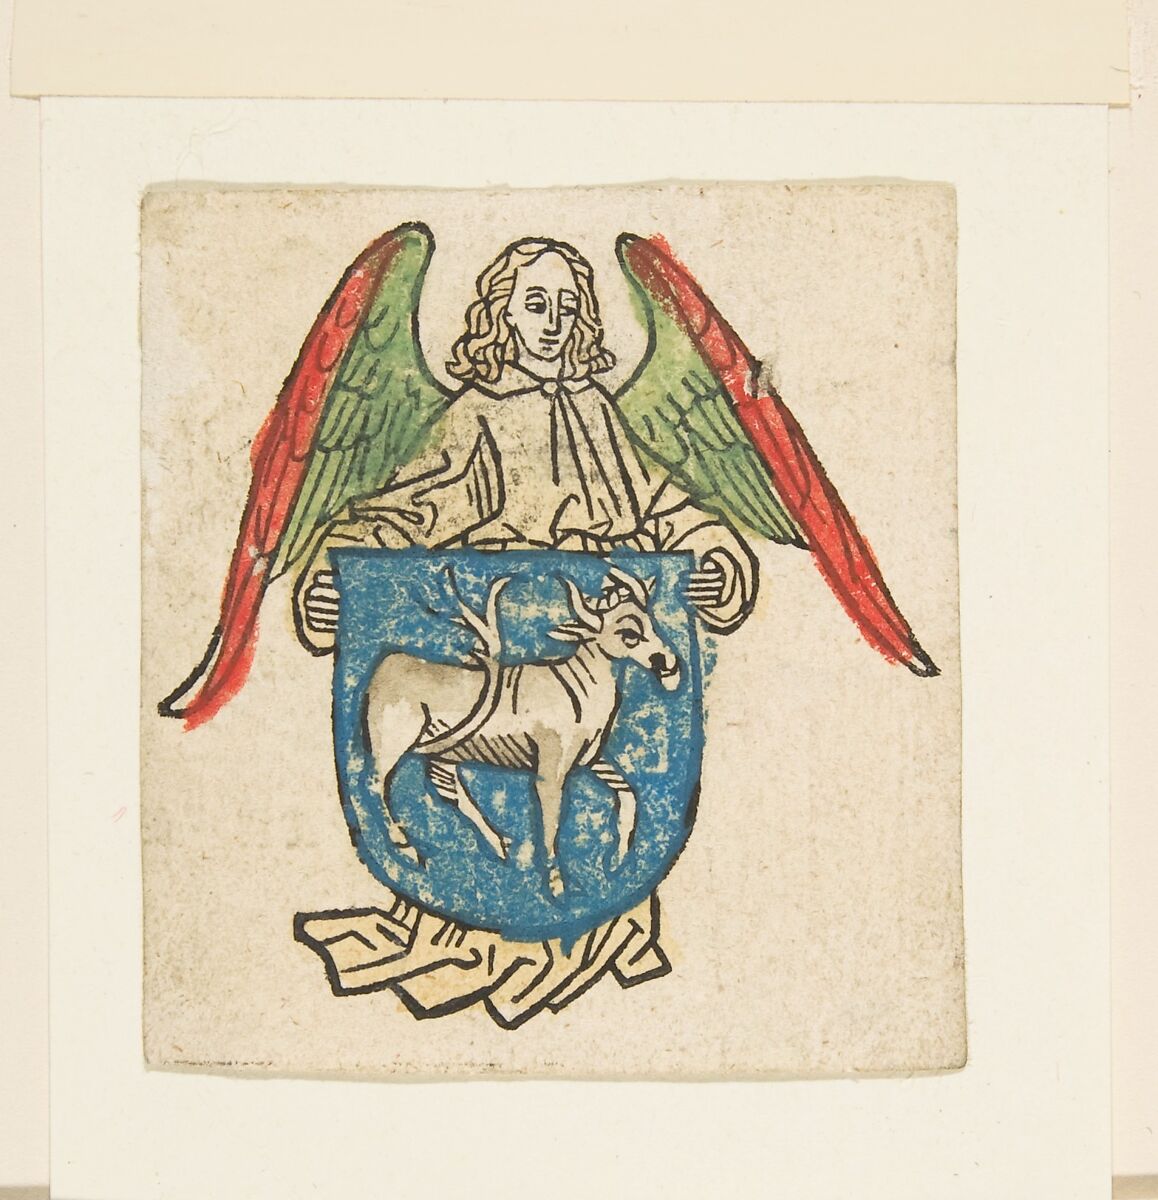 Bookplate of Hilprant Brandenburg, Anonymous, German, 15th century, Woodcut, hand-colored 